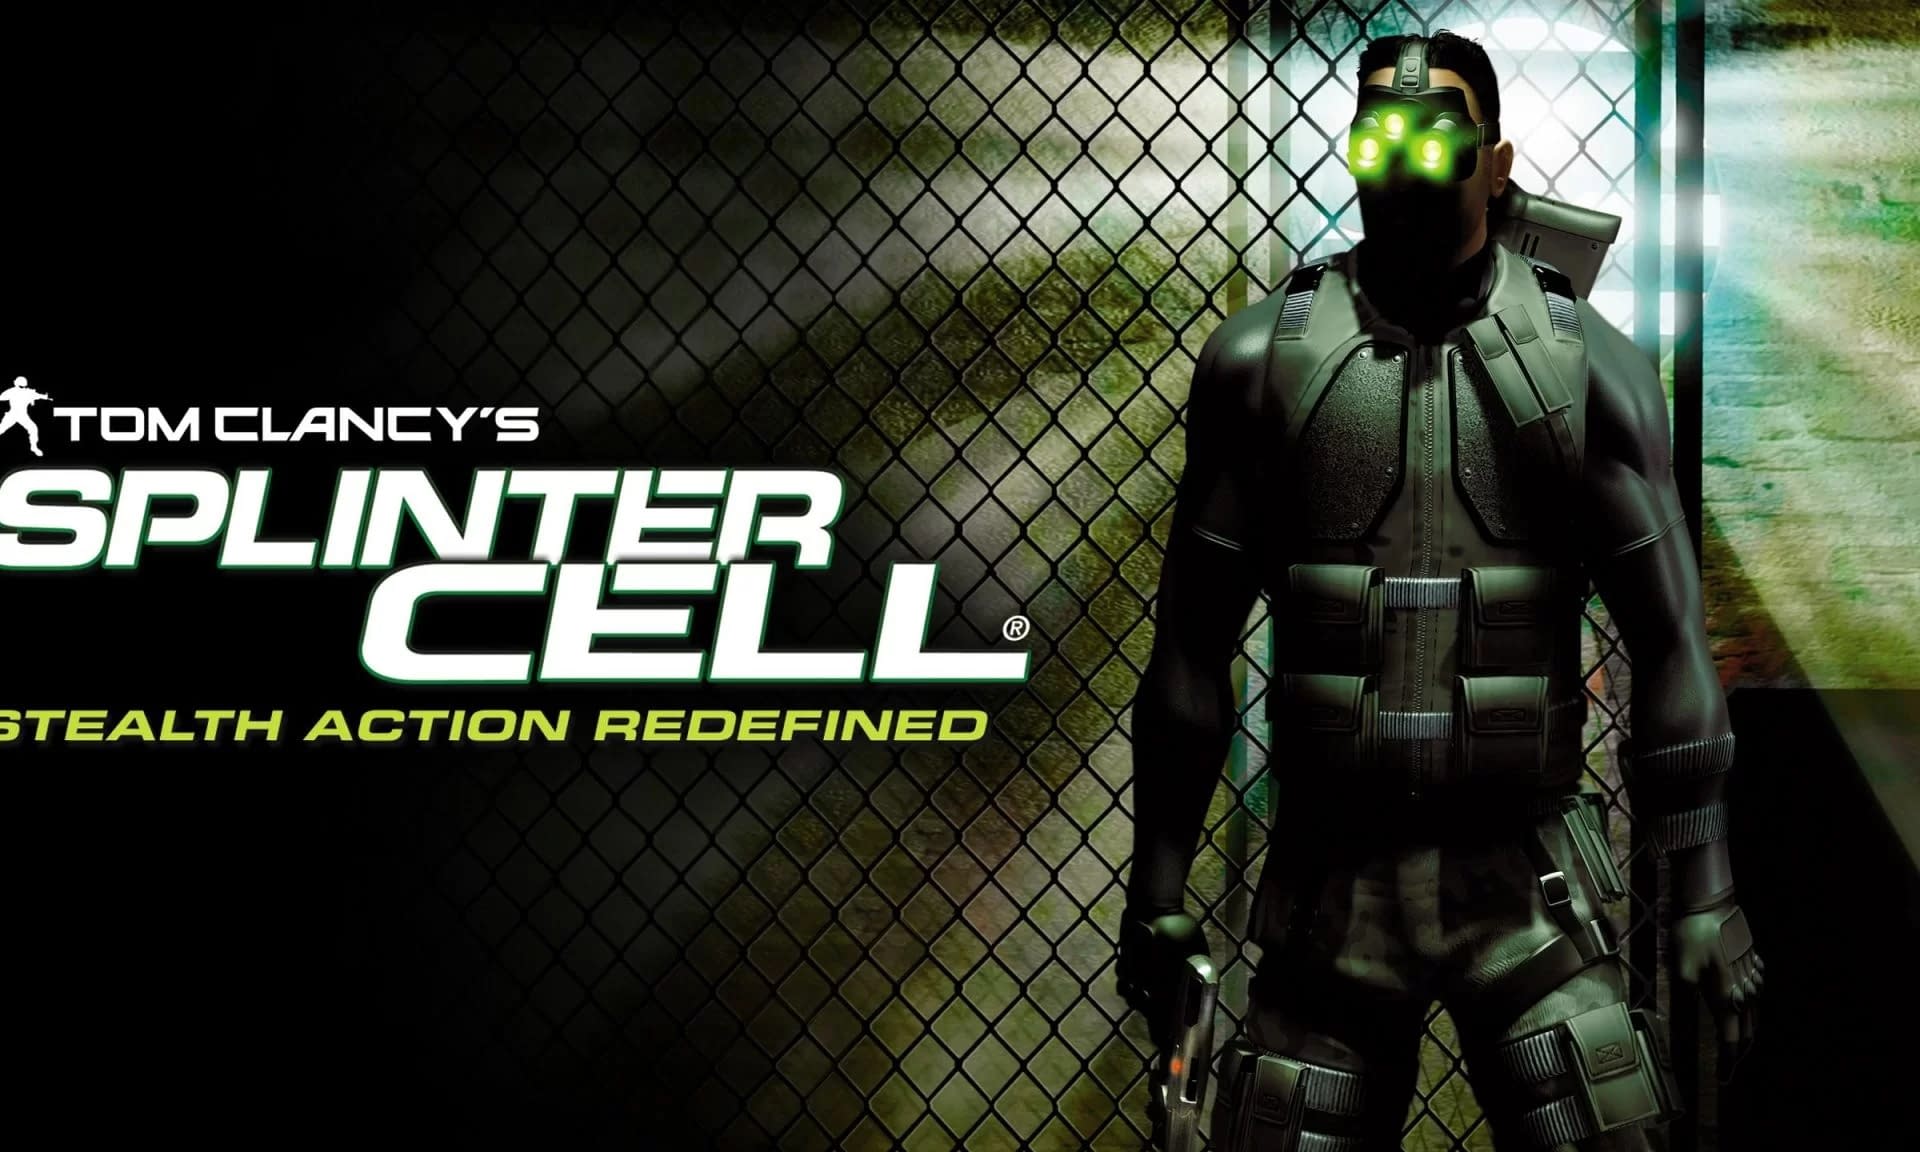 Tom Clancy’s Splinter Cell is Free on the Ubisoft Store until November 30